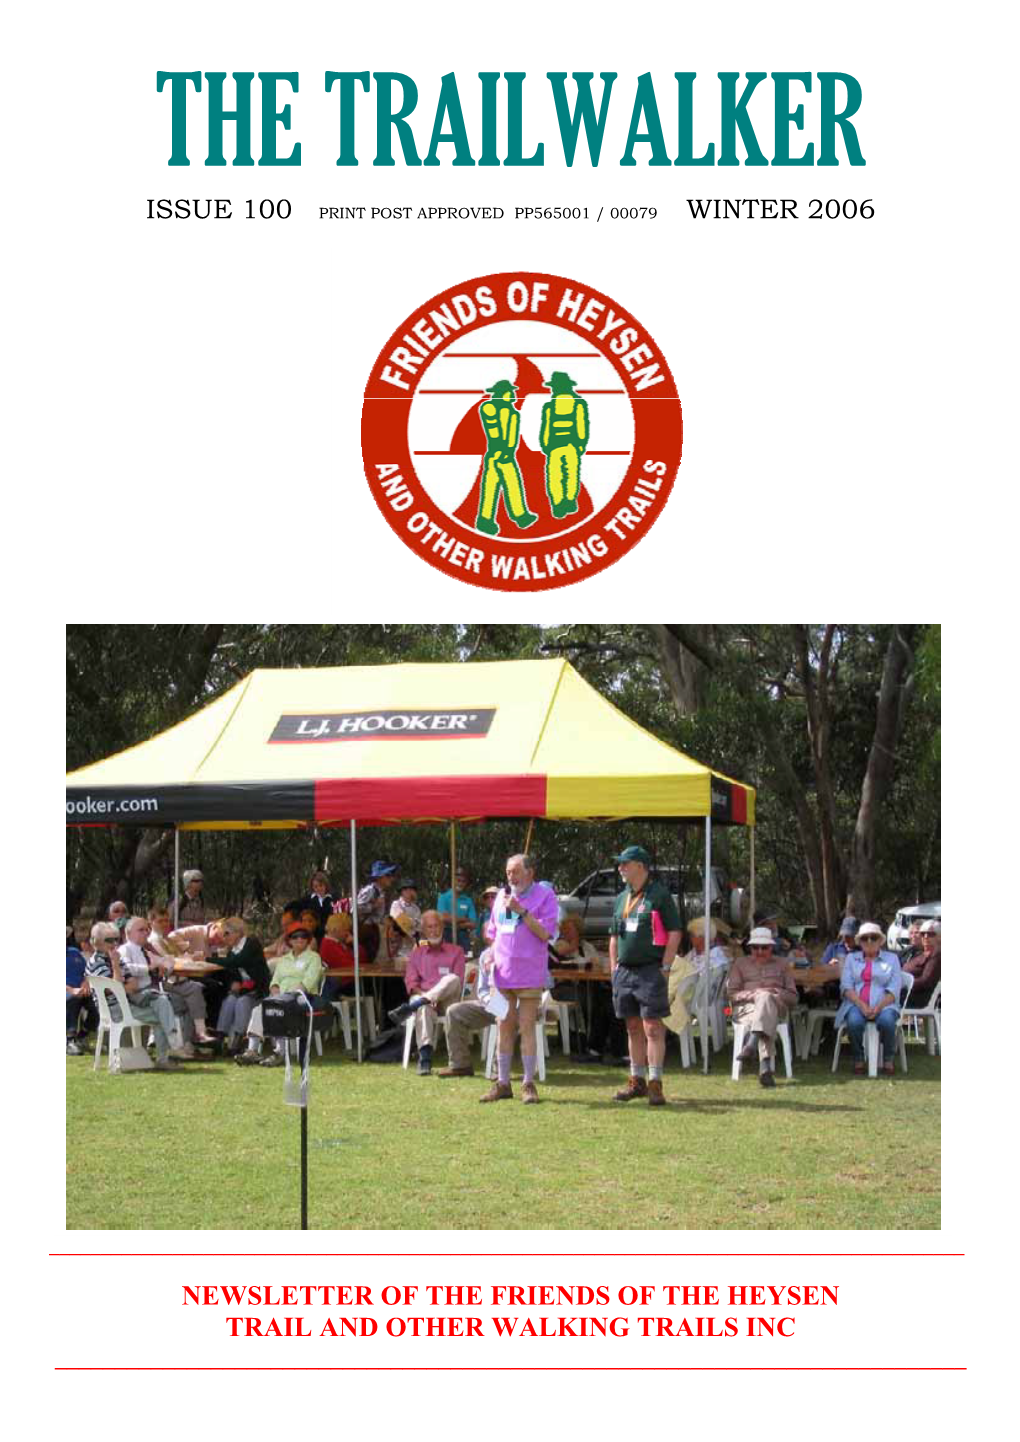 Winter 2006 Newsletter of the Friends of the Heysen Trail